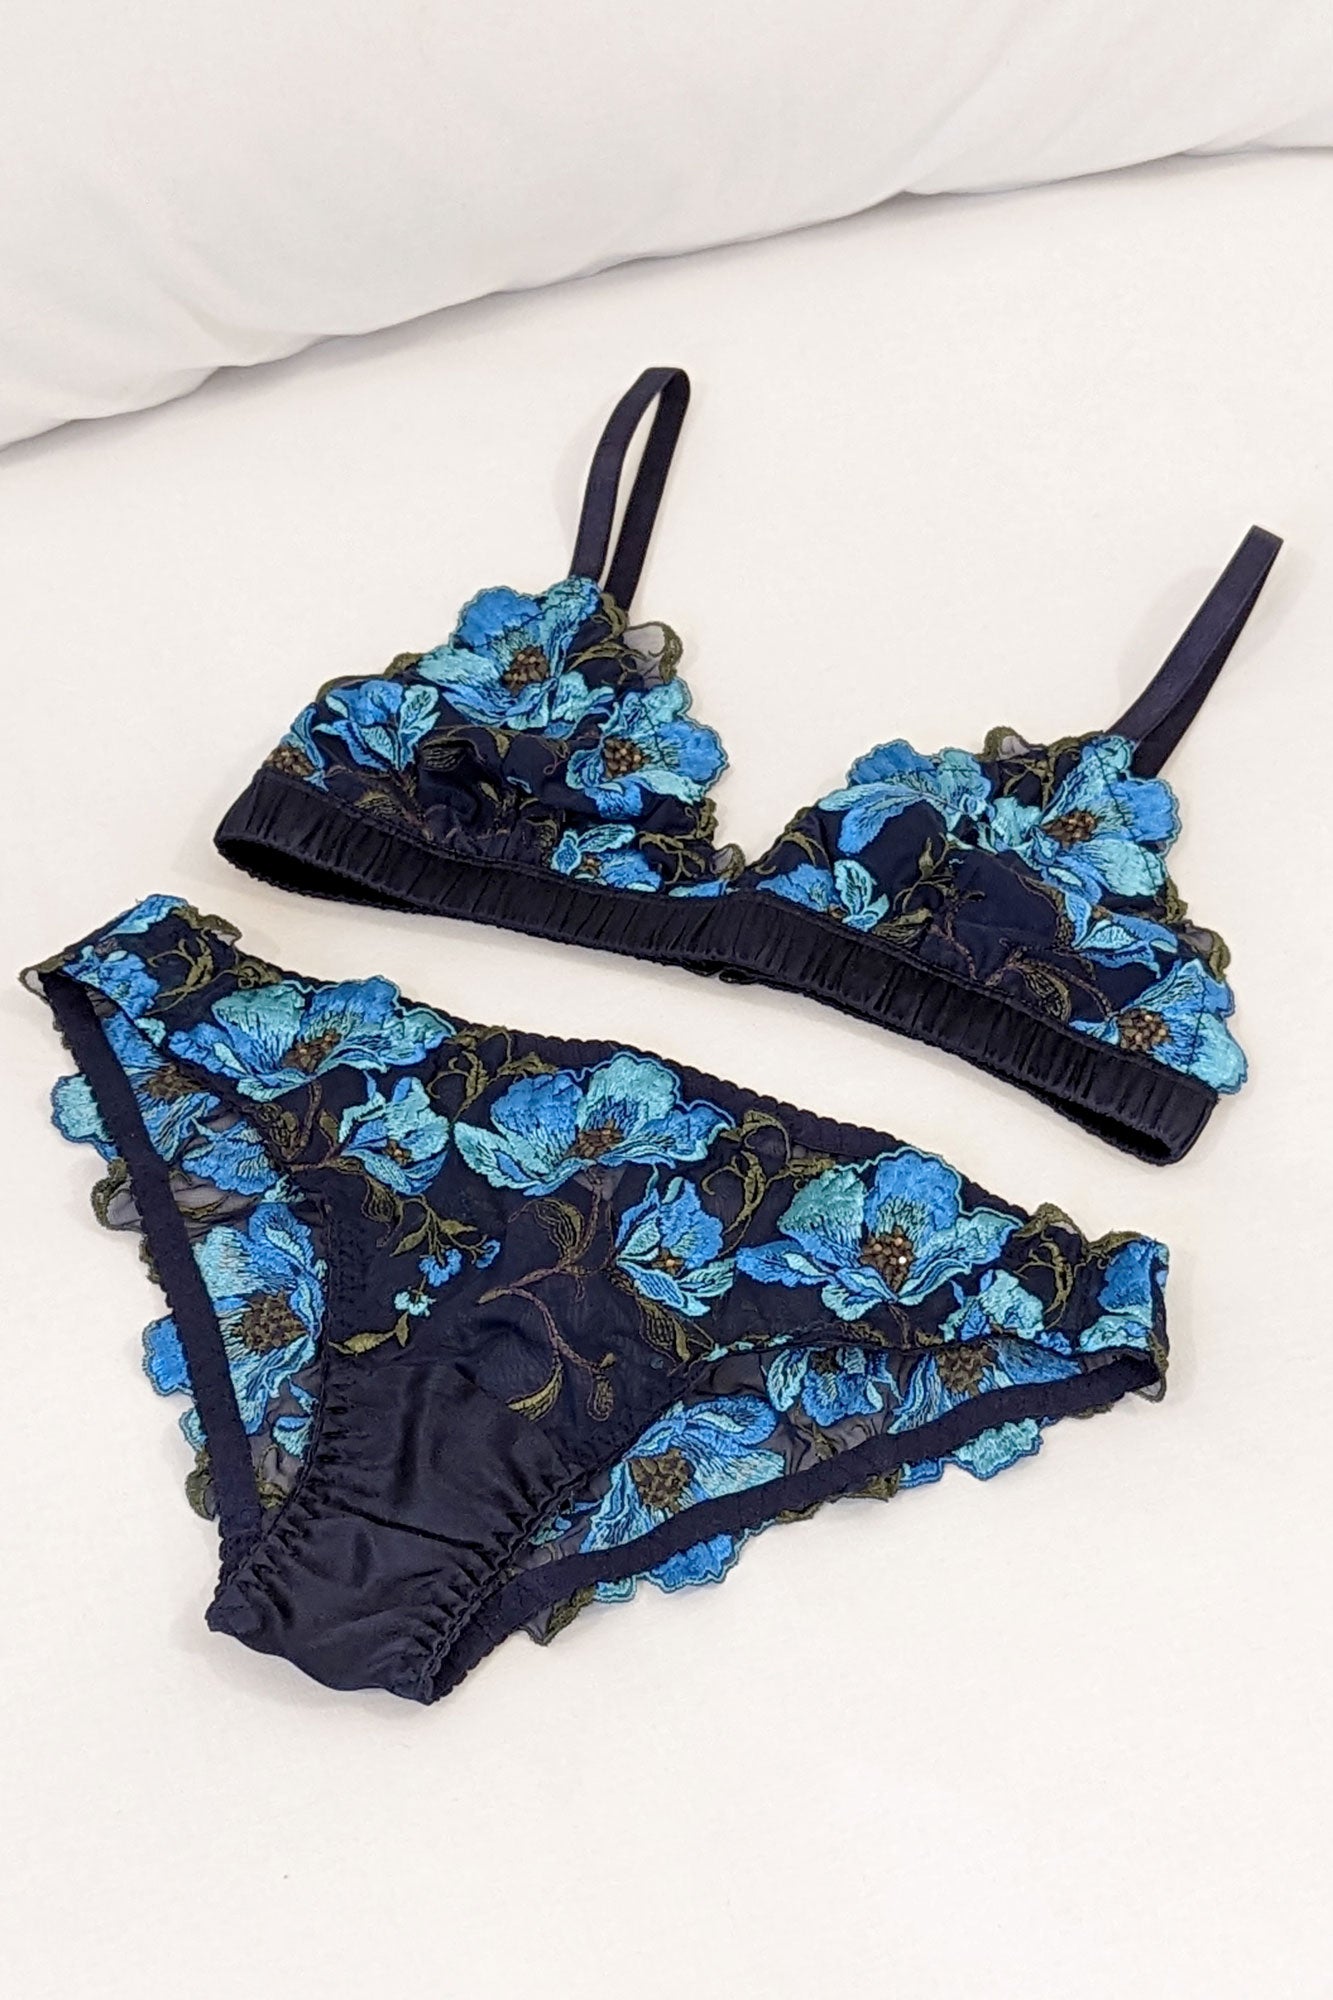 Embroidered cheeky knickers  Luxury lingerie by Angela Friedman